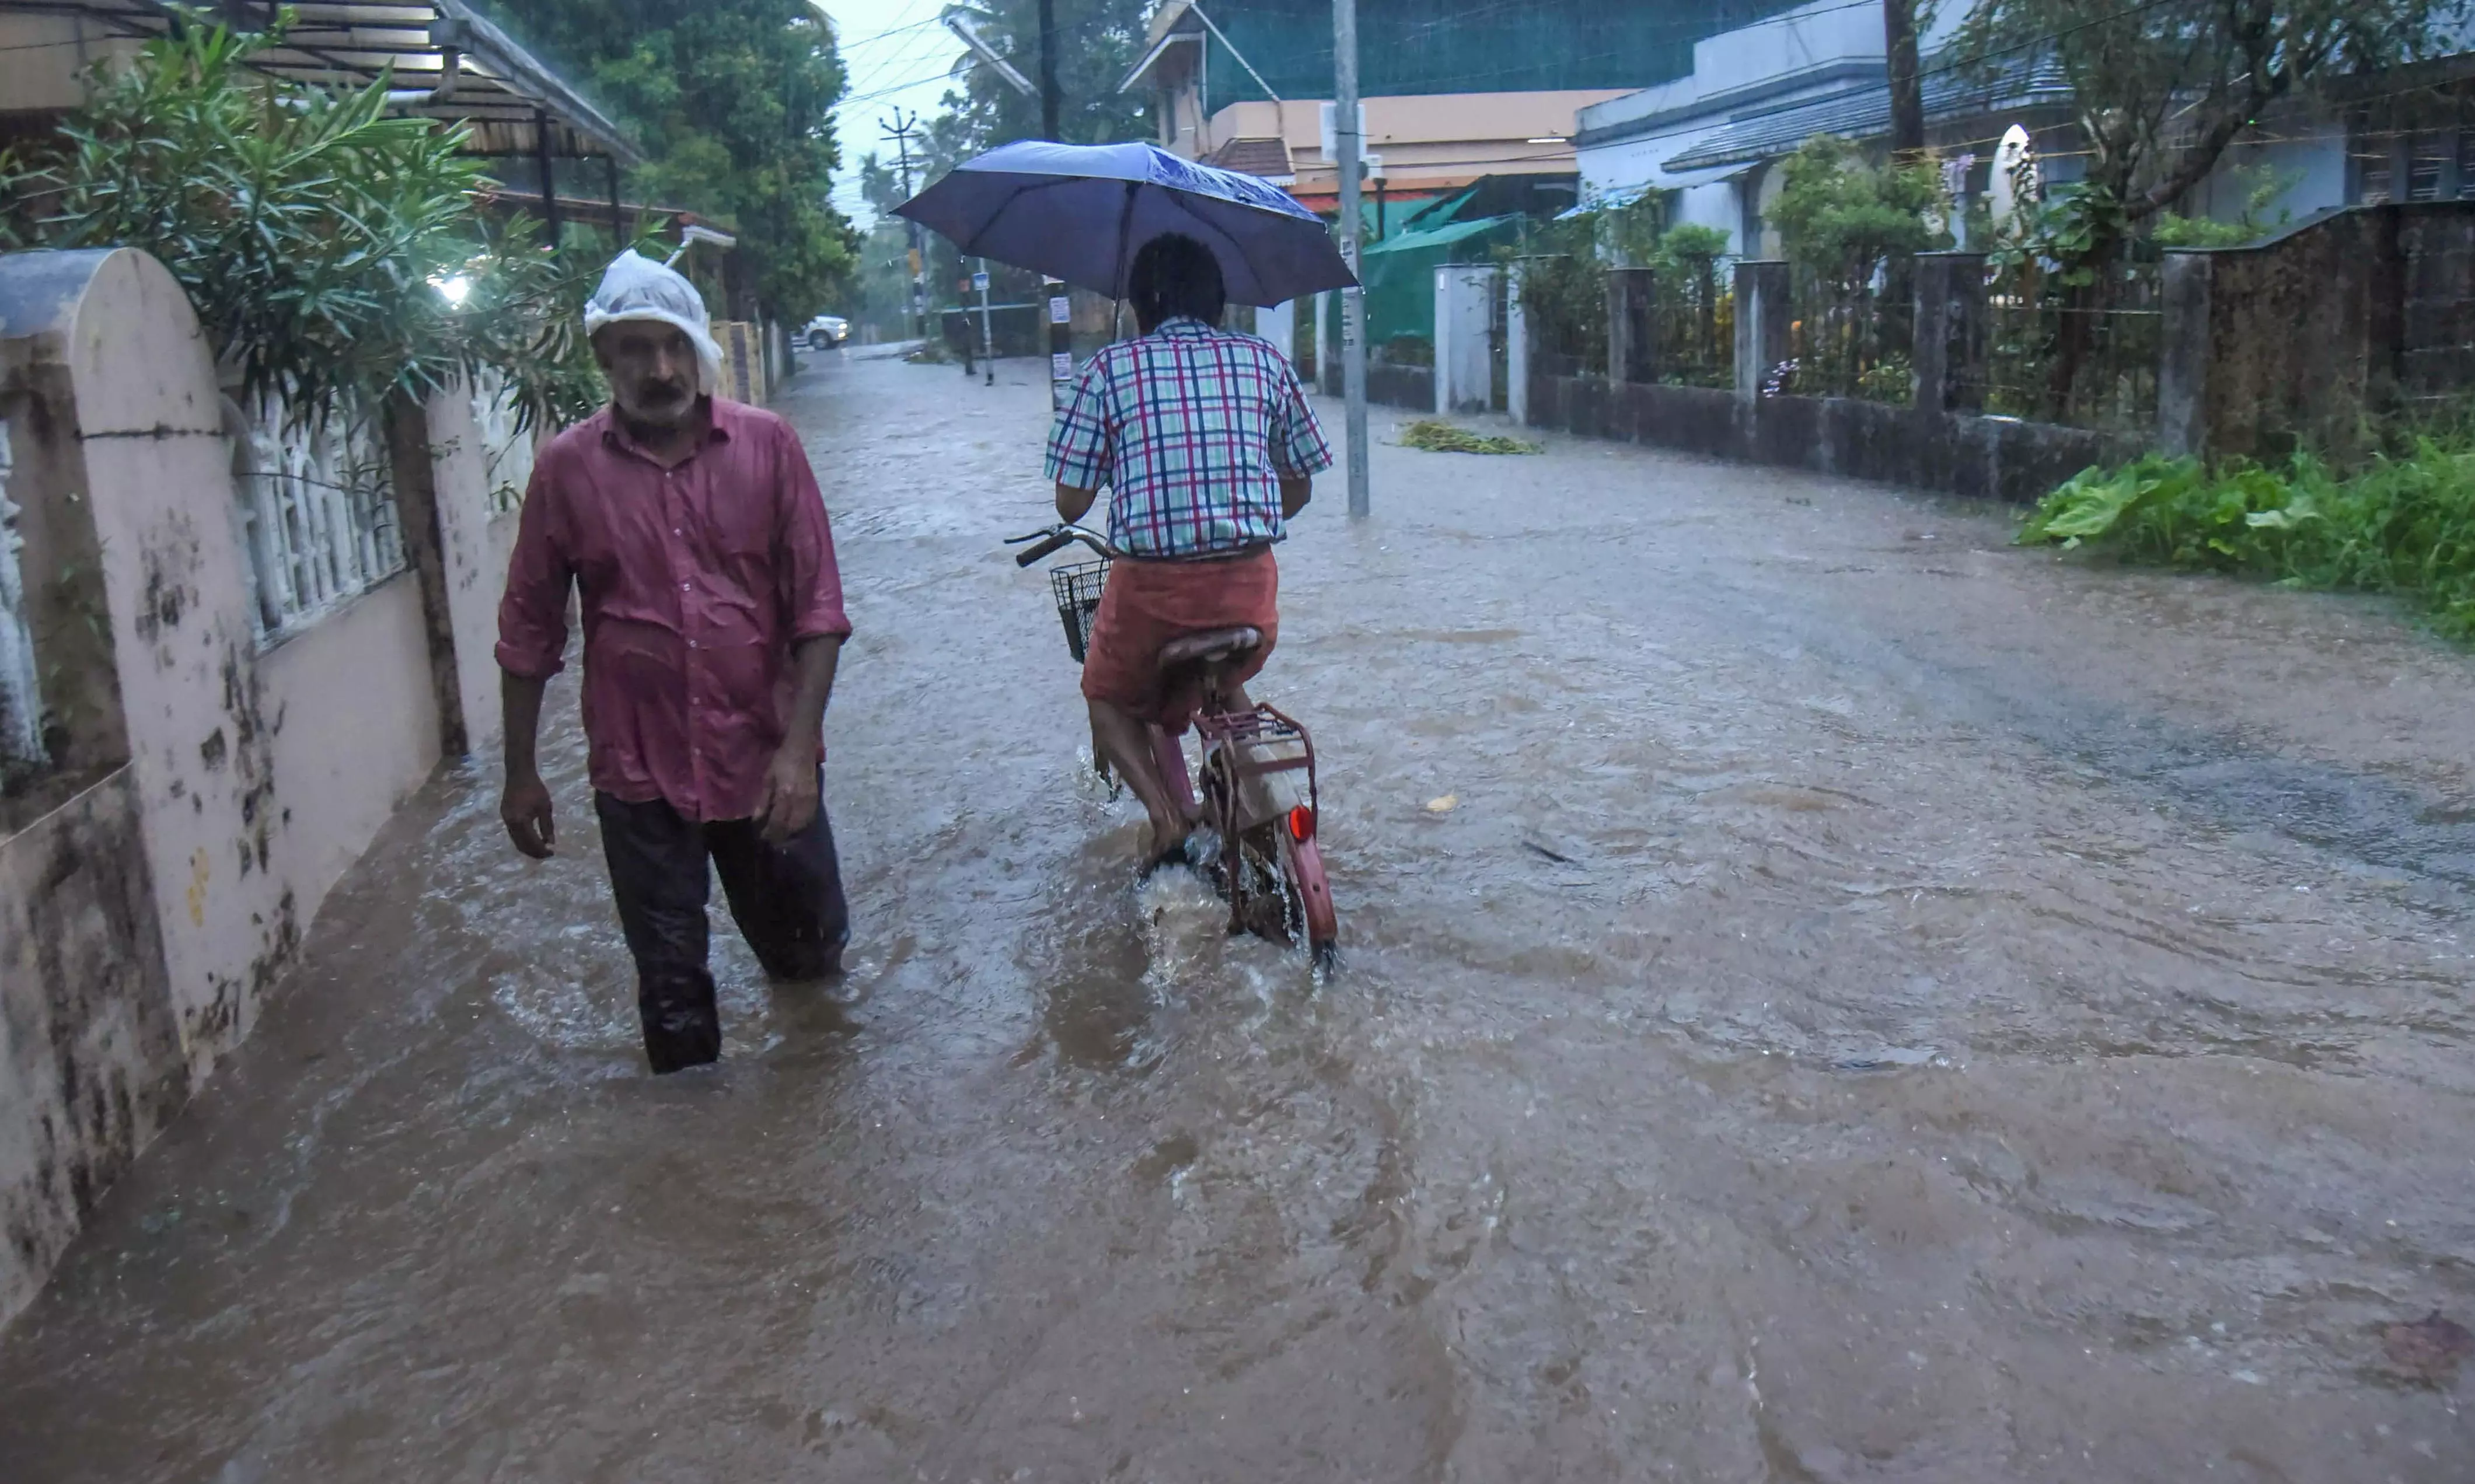 IMD predicts widespread rain in Kerala in next 5 days due to cyclonic circulation